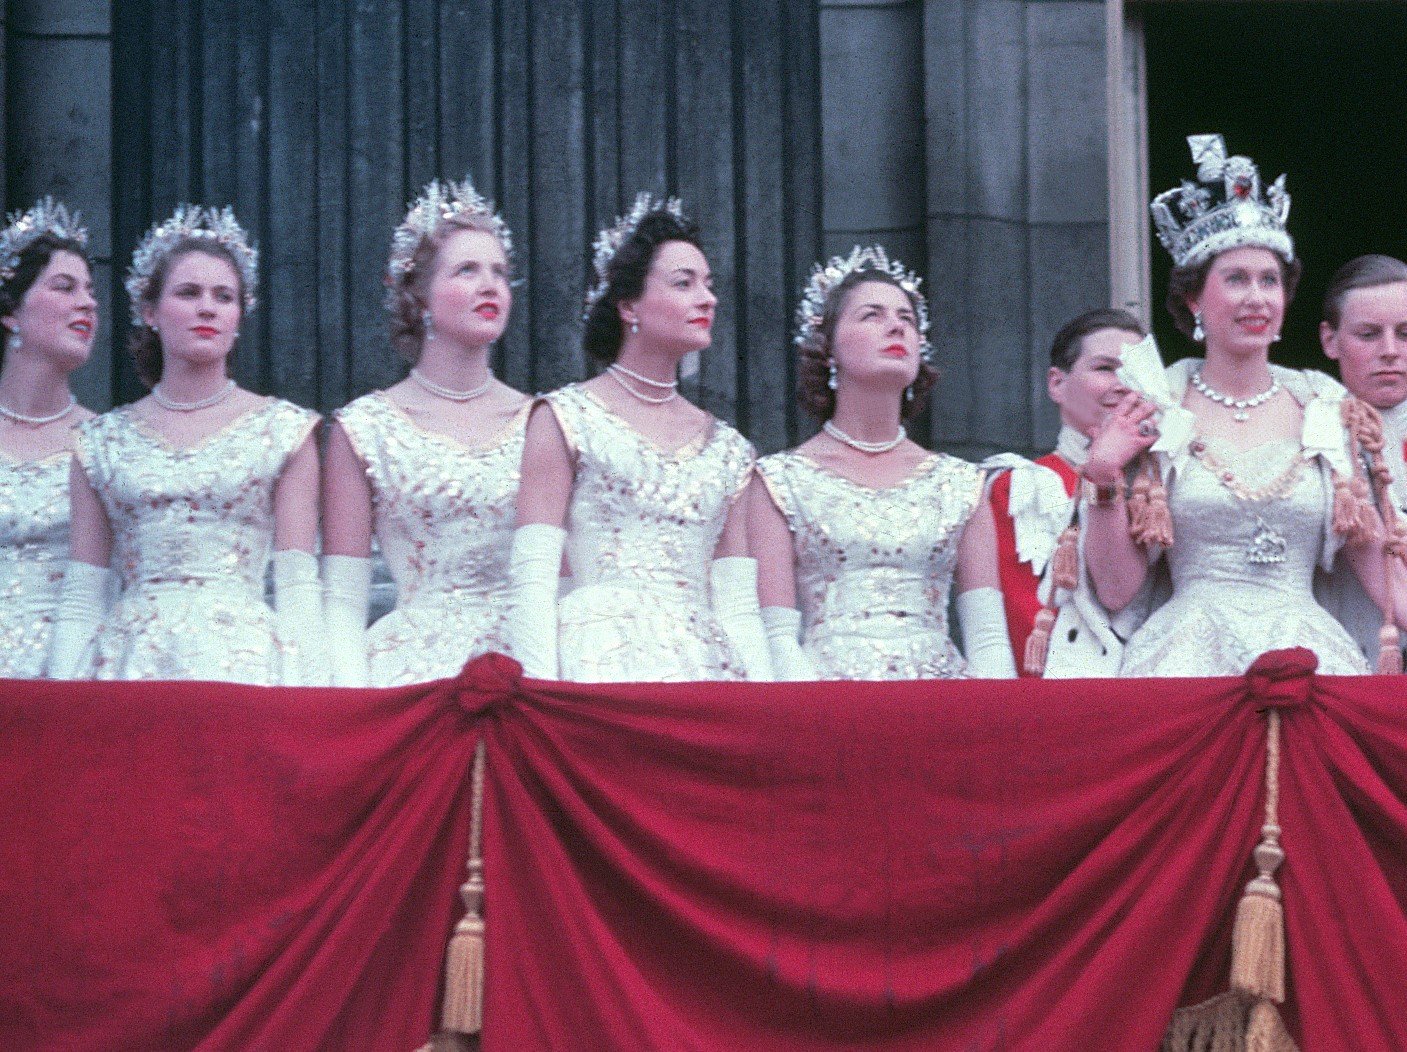 Queen Elizabeth II standing on the balcony of Buckingham Palace with several women by her side following her Coronation